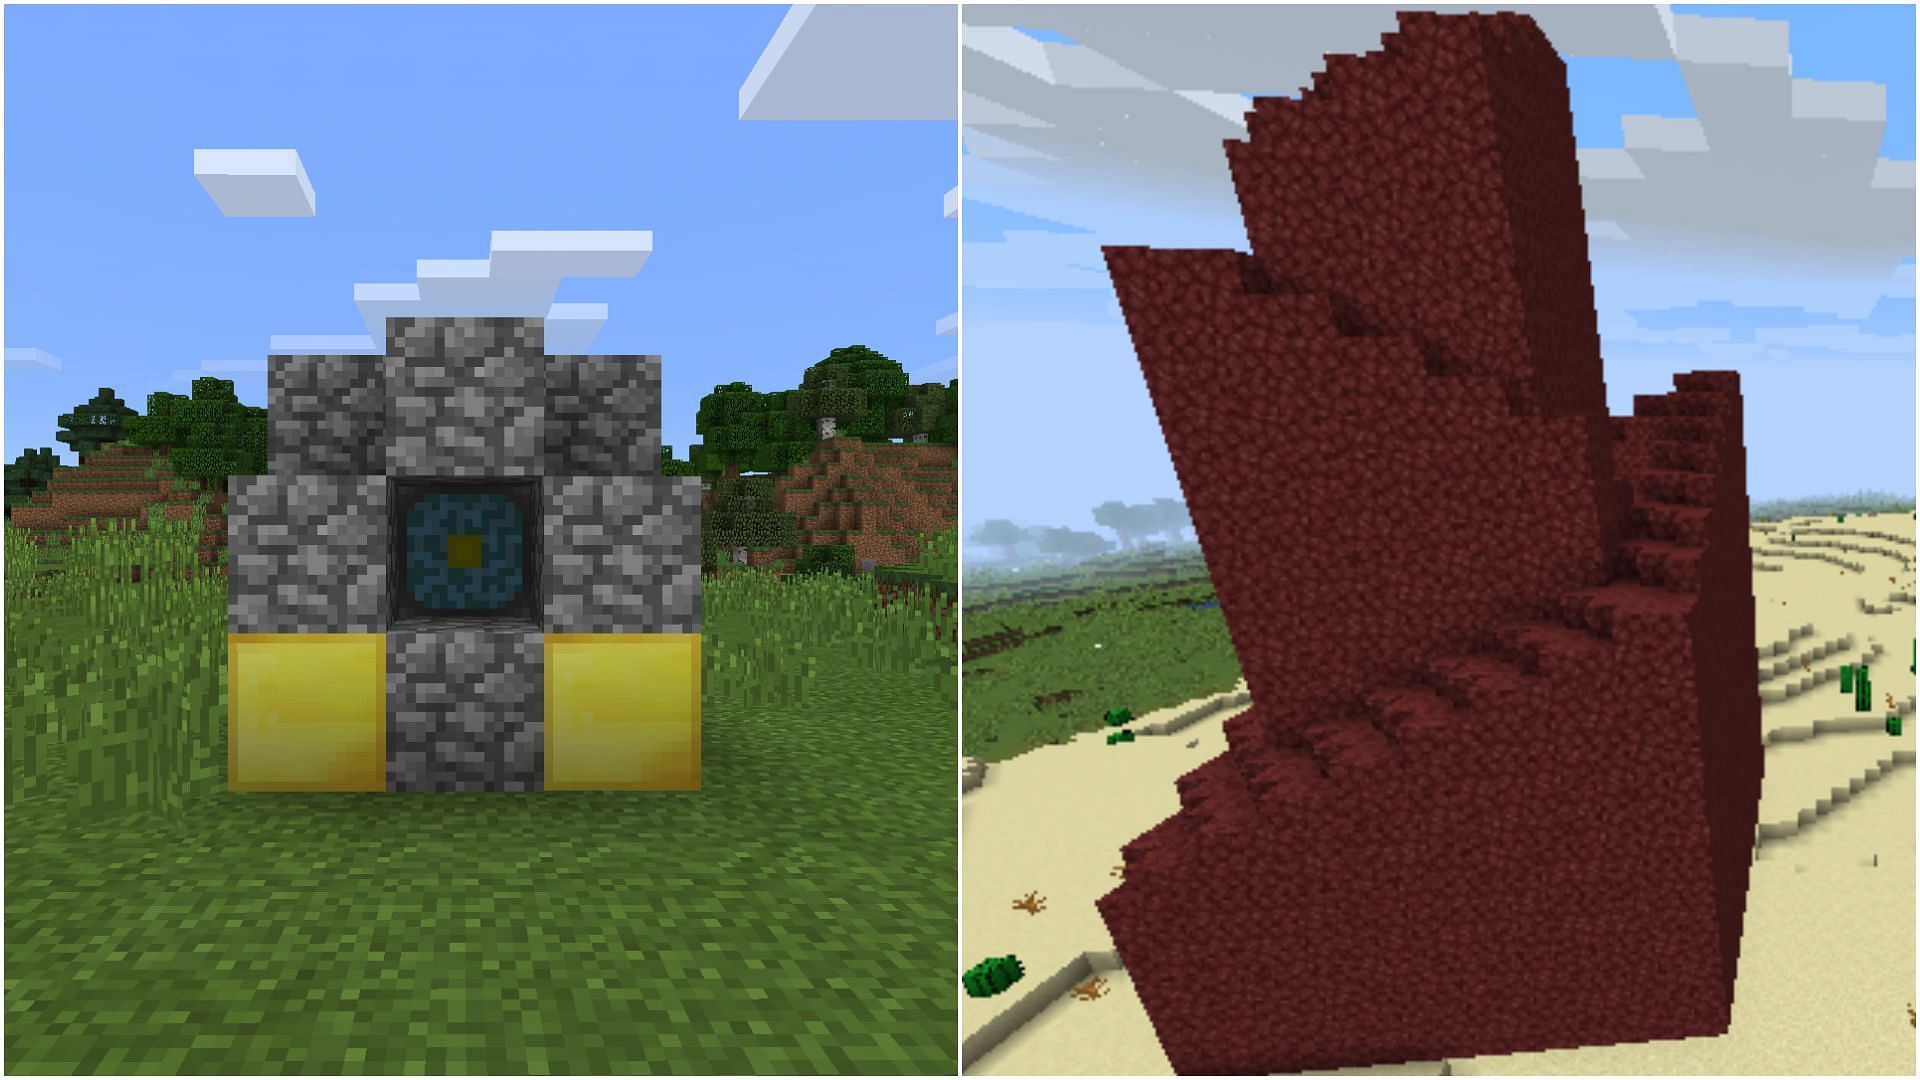 Nether reactor core and Nether reactor structure (Collage via Sportskeeda)